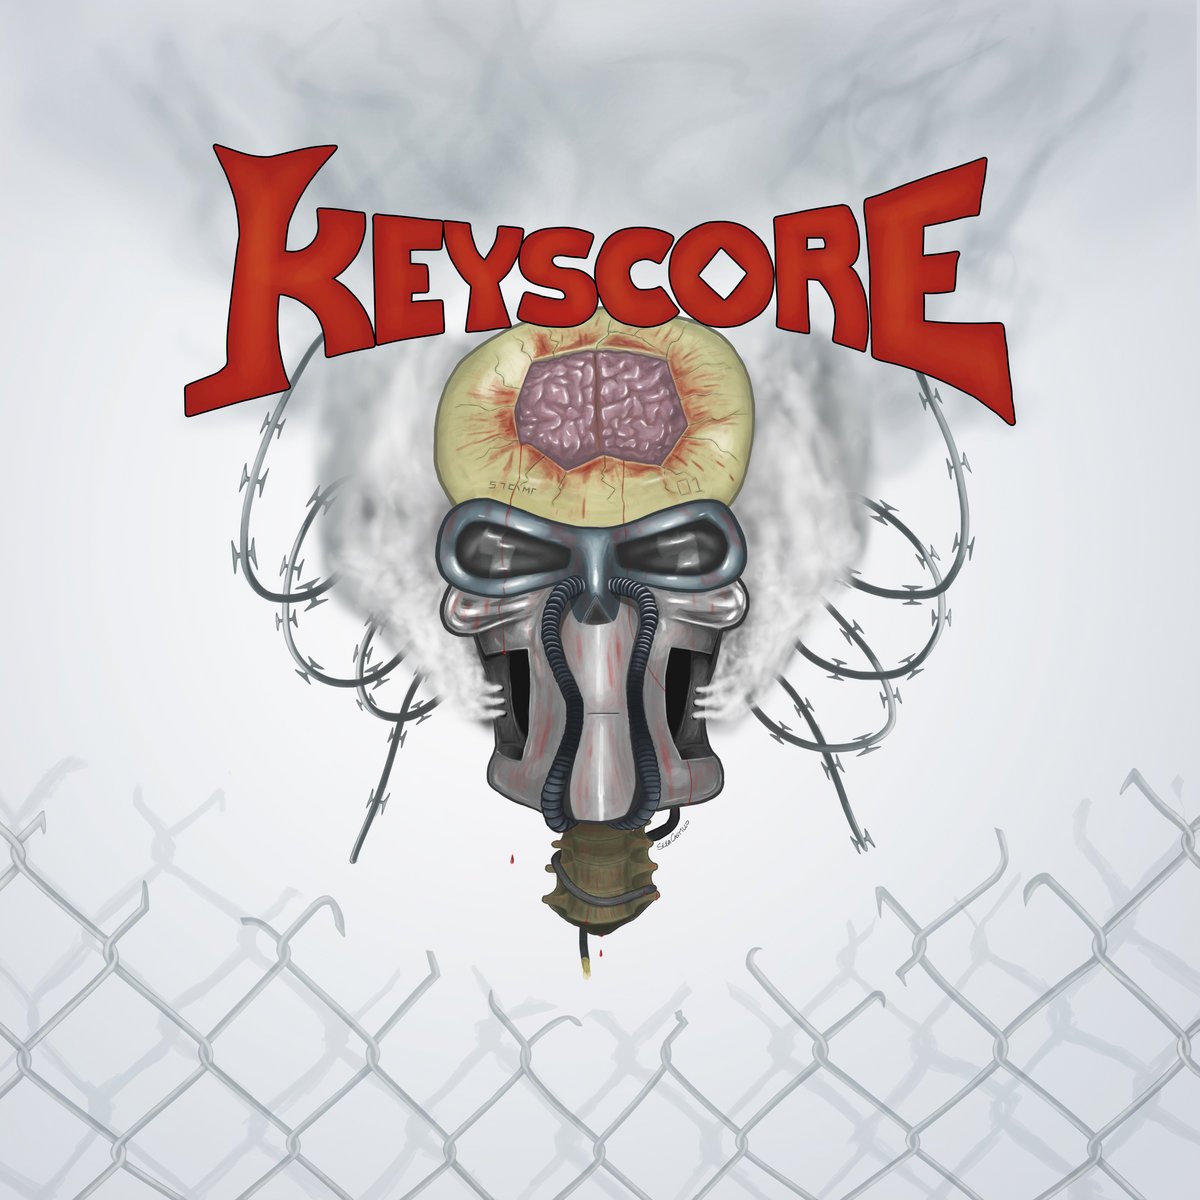 Interview with KEYSCORE